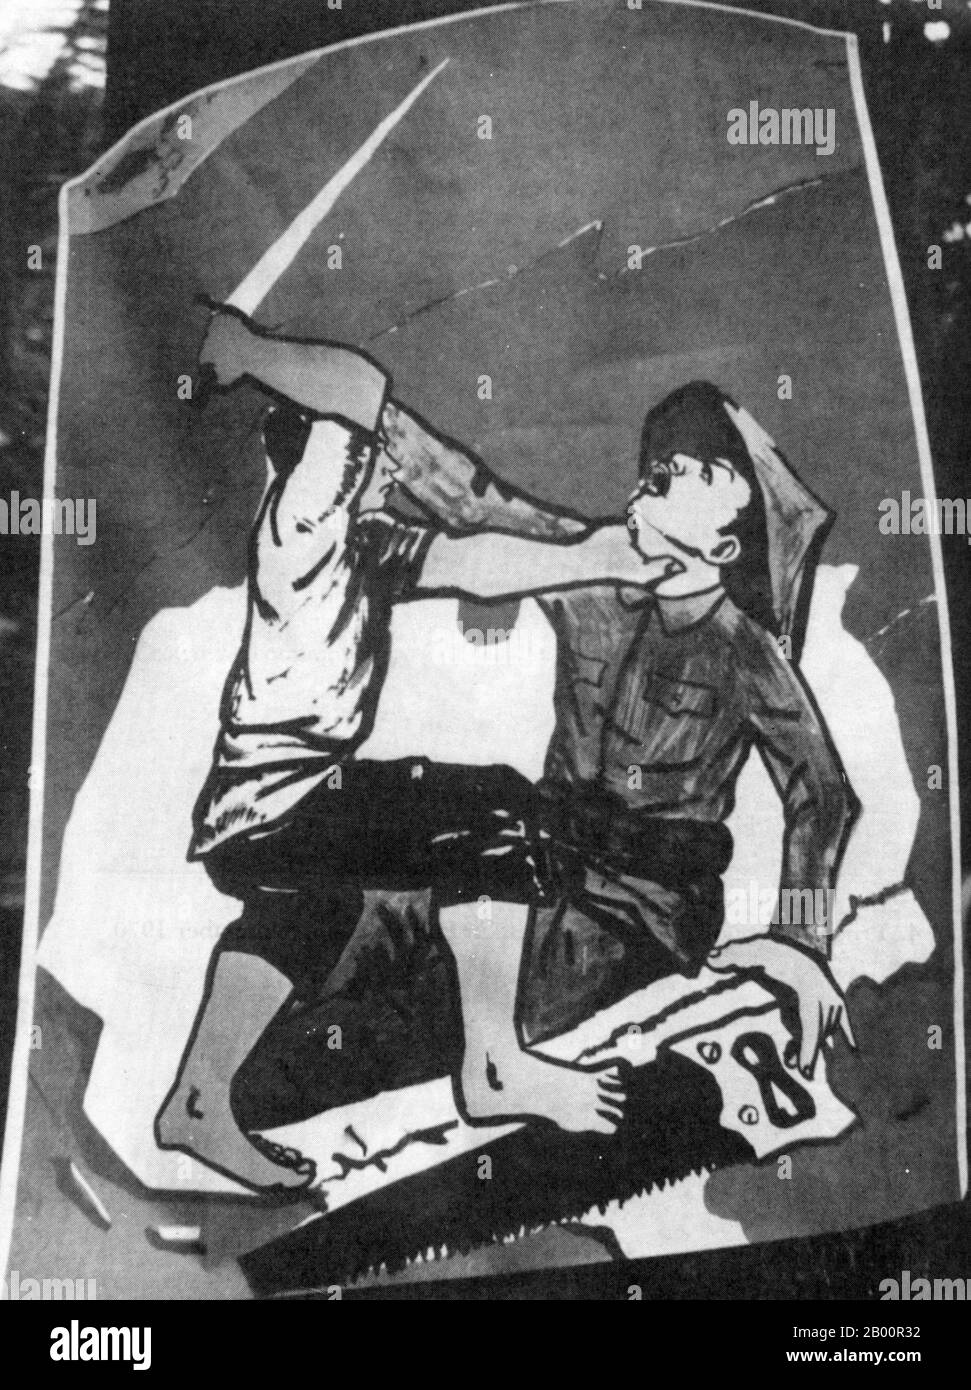 Cambodia: An anti-Vietnamese street poster from the Lon Nol era (1970-1975).  The poster shows a Khmer patriot attacking a Vietnamese who has been attempting to saw off Cambodian national territory in the south and east. Stock Photo